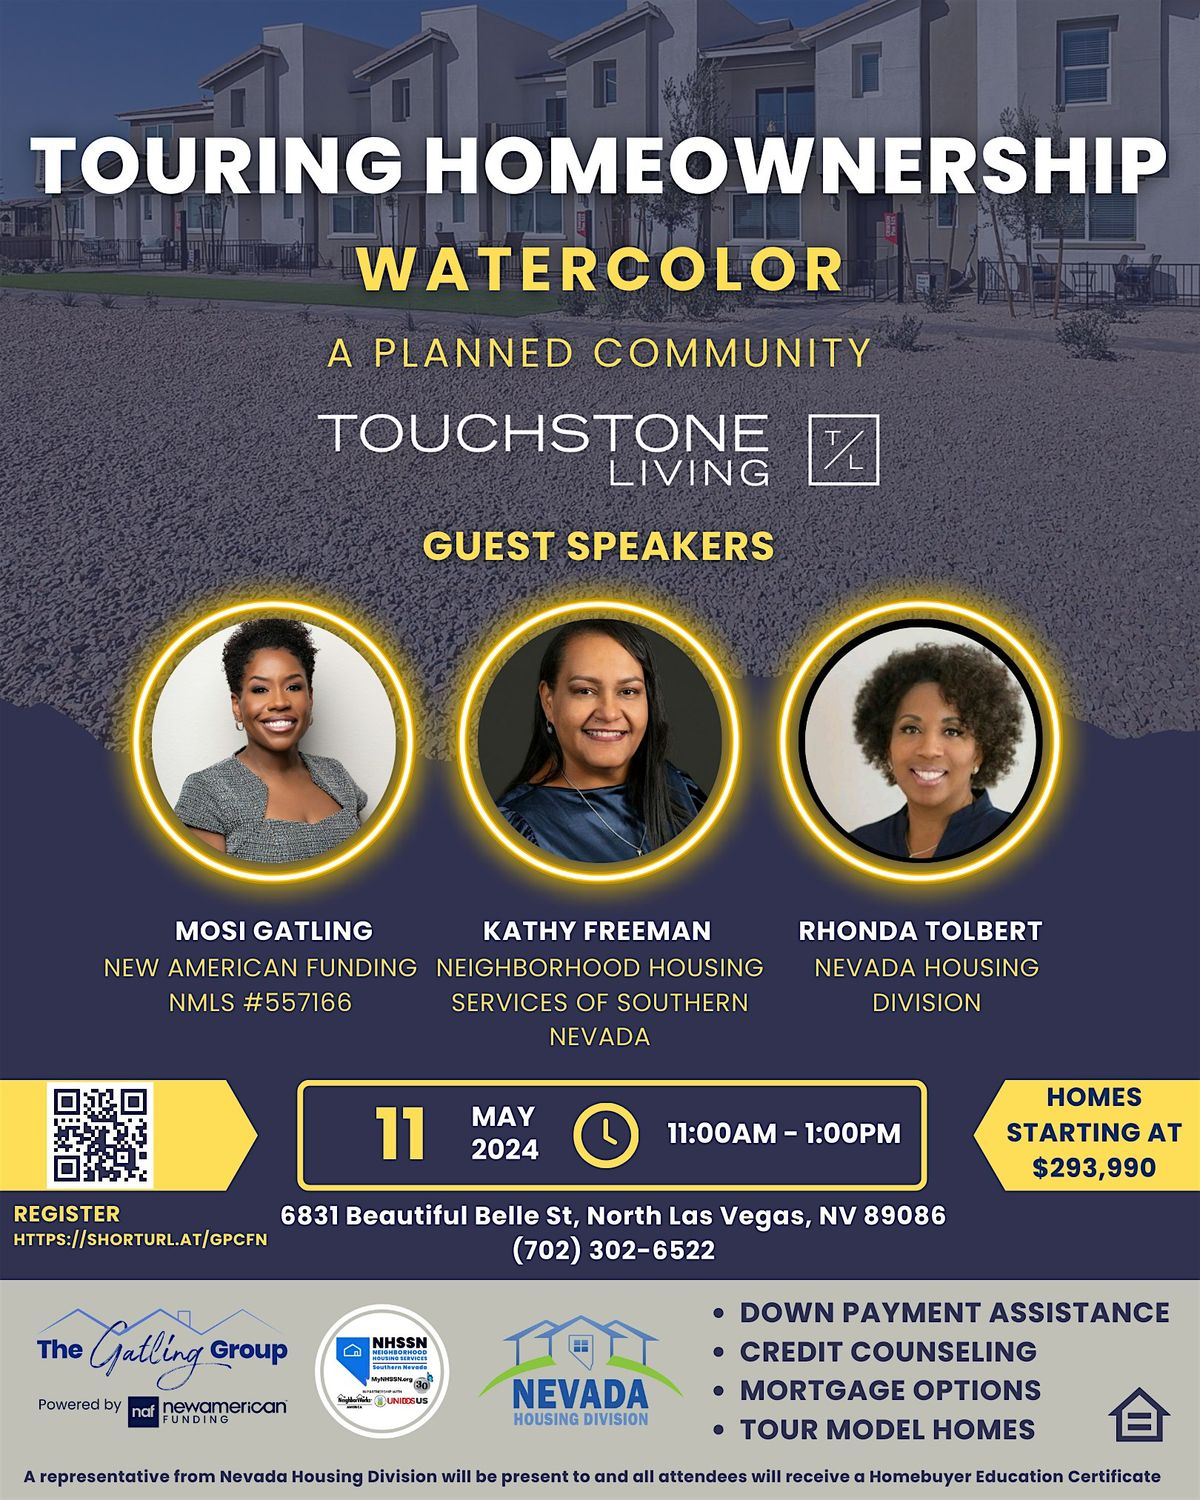 Homeownership and Tour Touchstone Living Watercolor Community